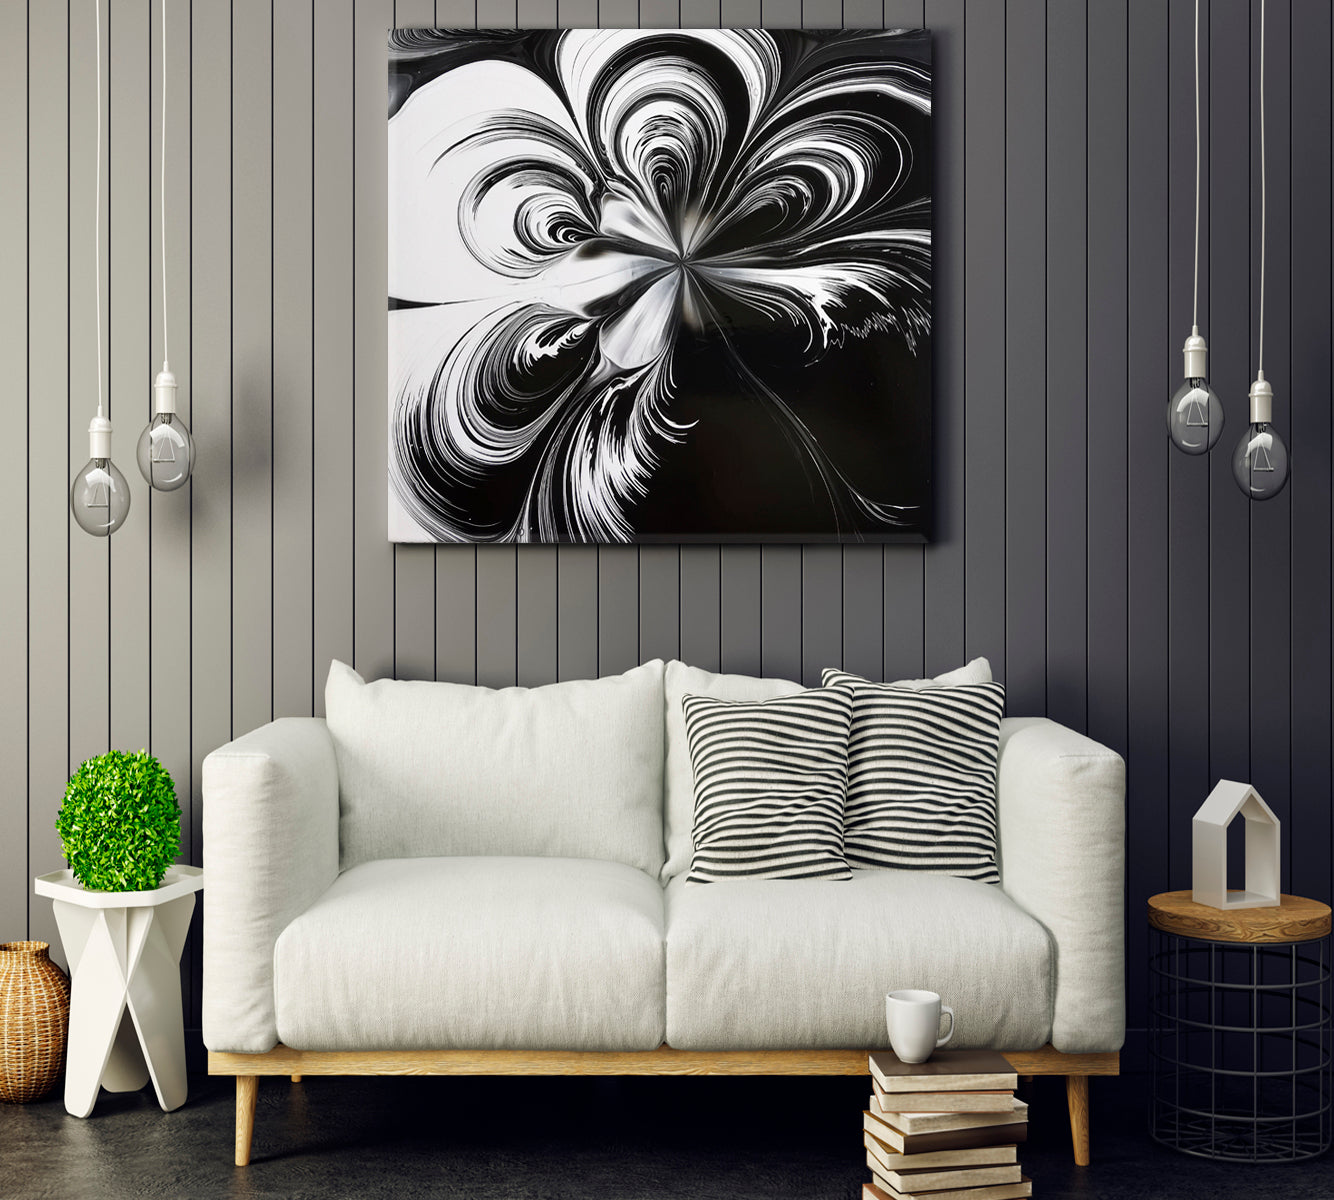 Black And White Abstract Poster Fluid Art, Oriental Marbling Canvas Print Artesty 1 Panel 12"x12" 